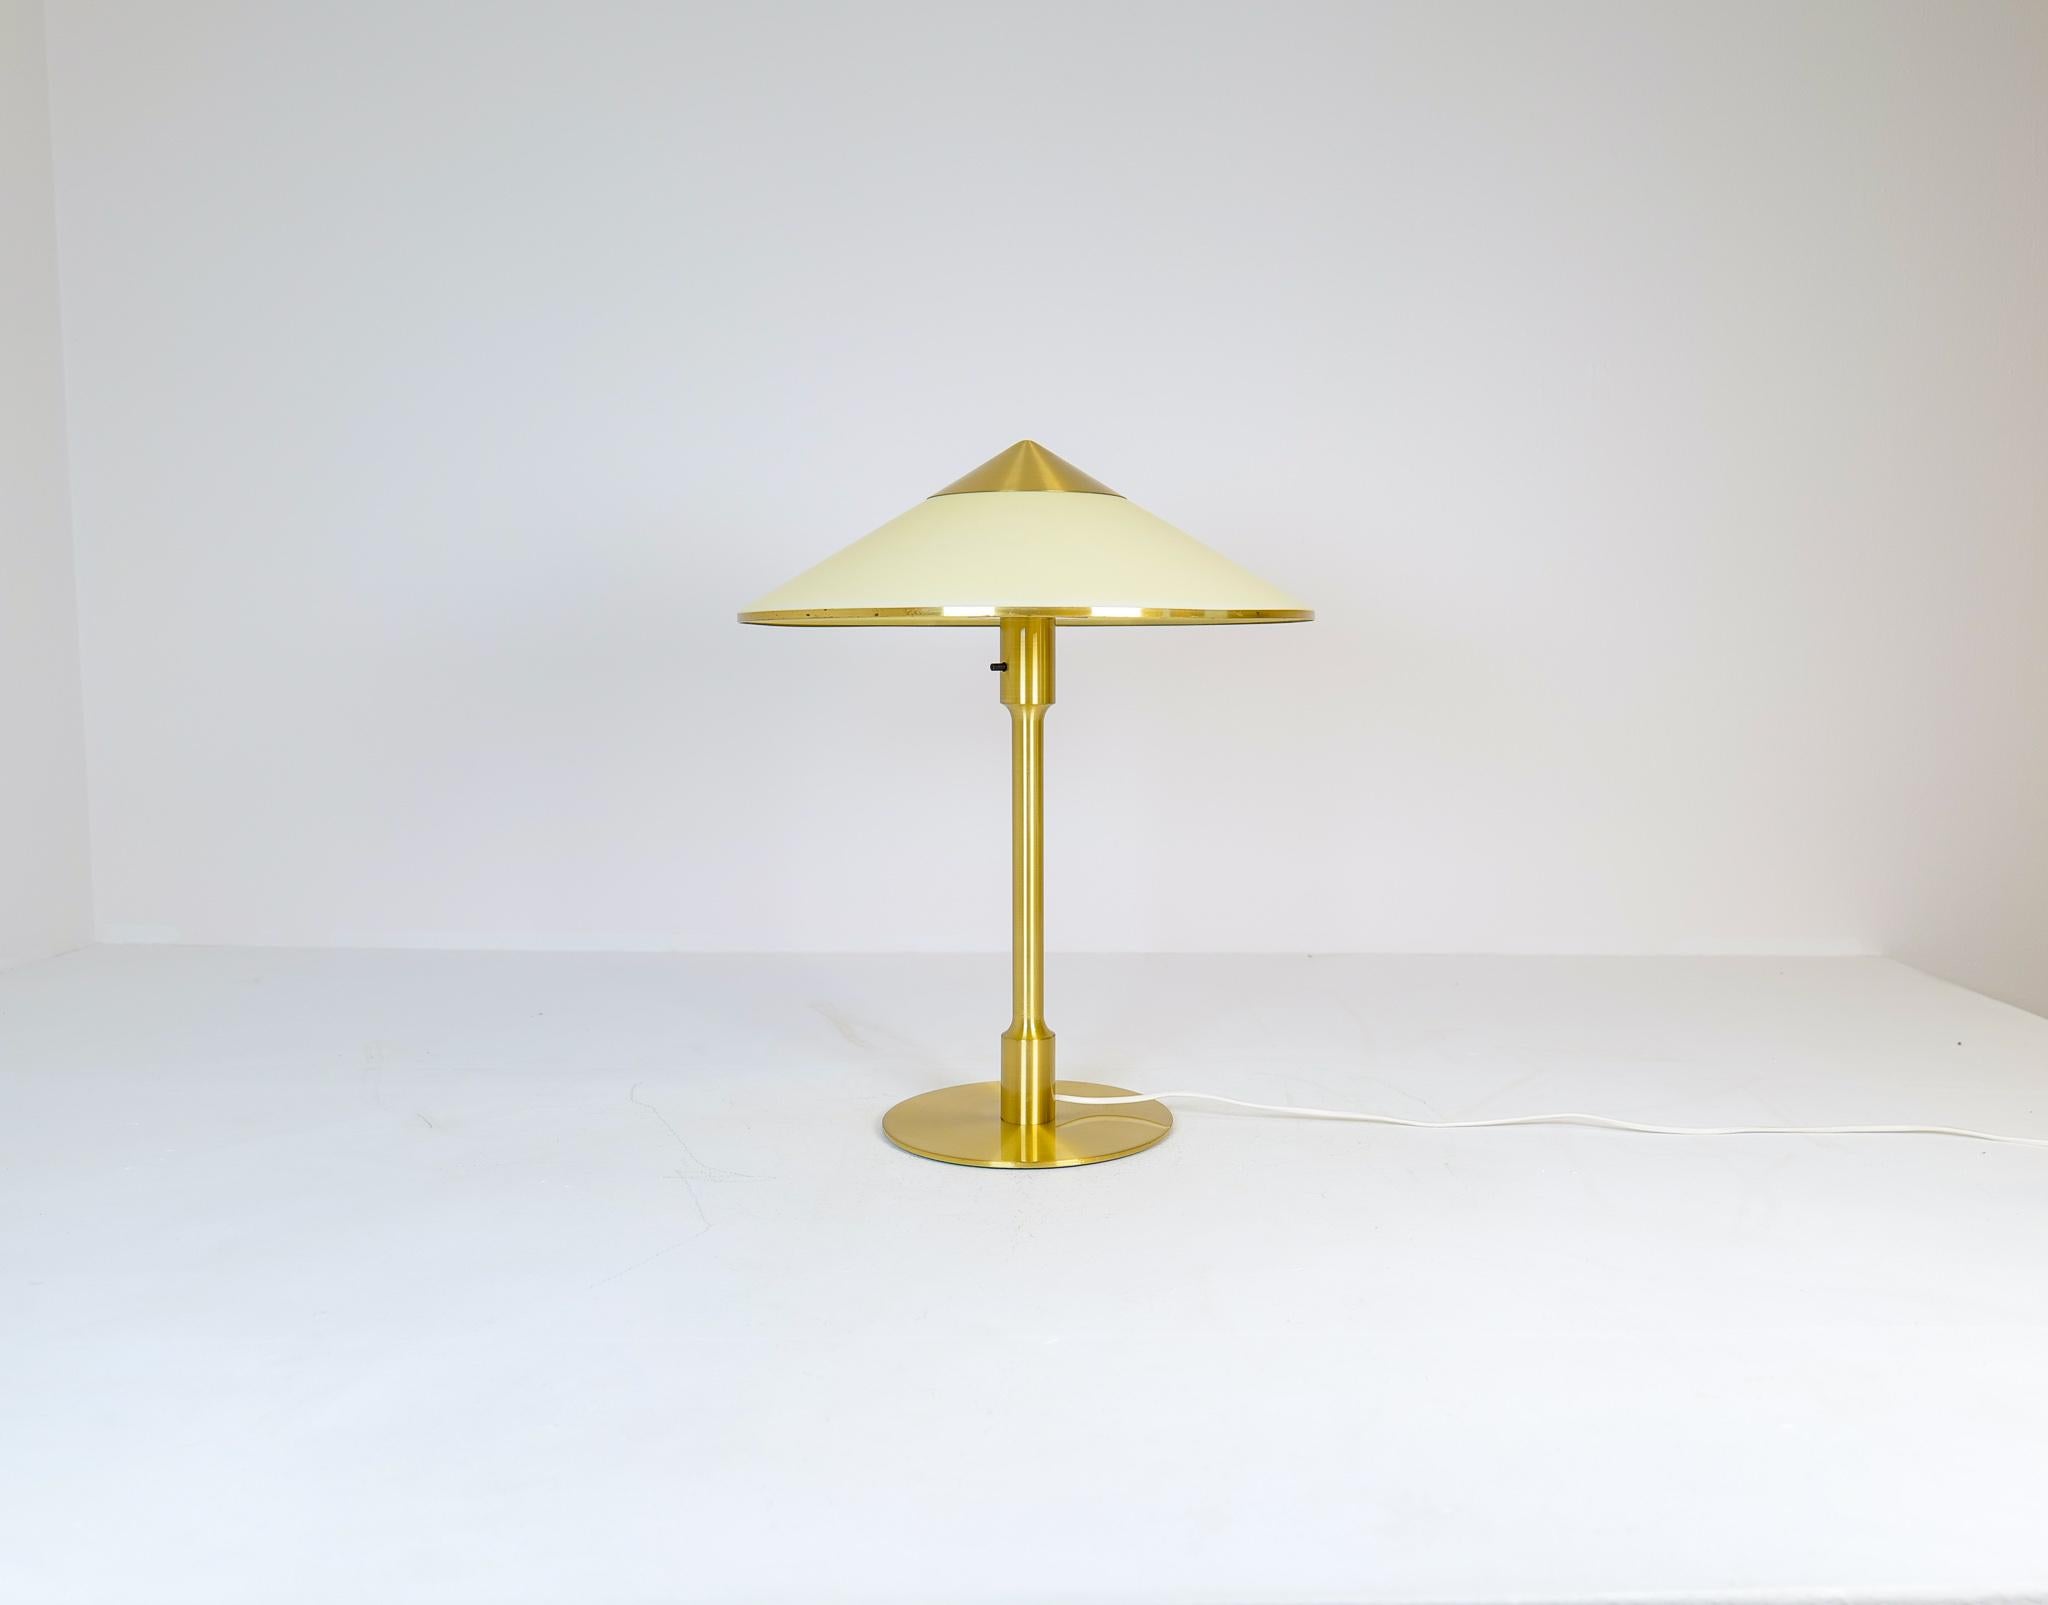 This stunning table lamp was produced in Denmark in 1950s at Fog & Mørup. This iconic lamp called 